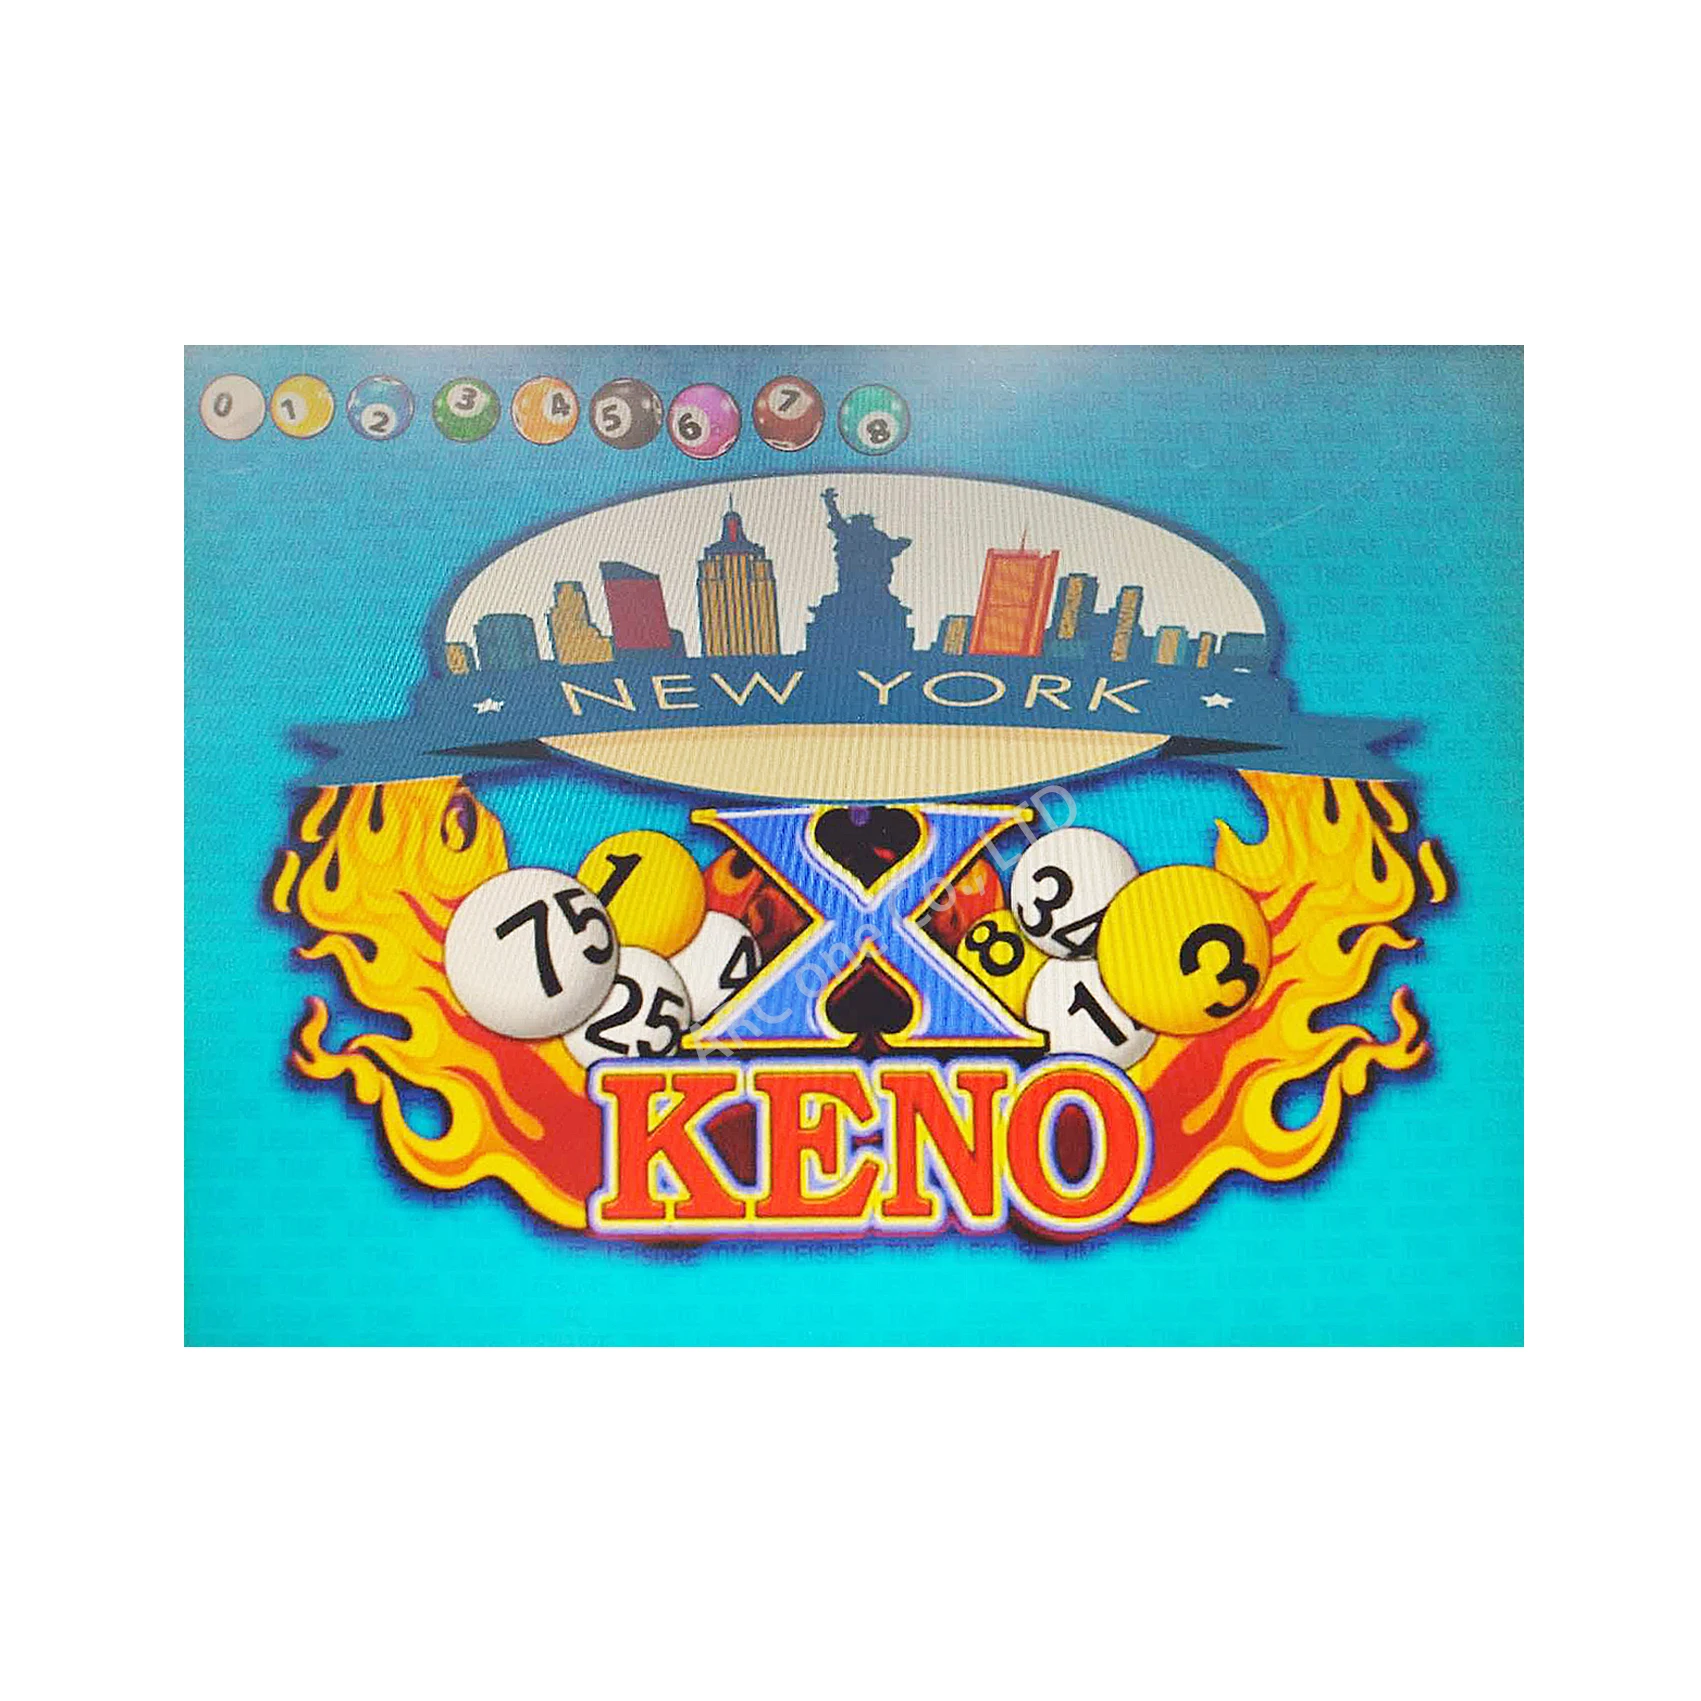 

New York keno bomb bonus game gambling machine, touch screen or track ball casino roulette machine electric type for sale